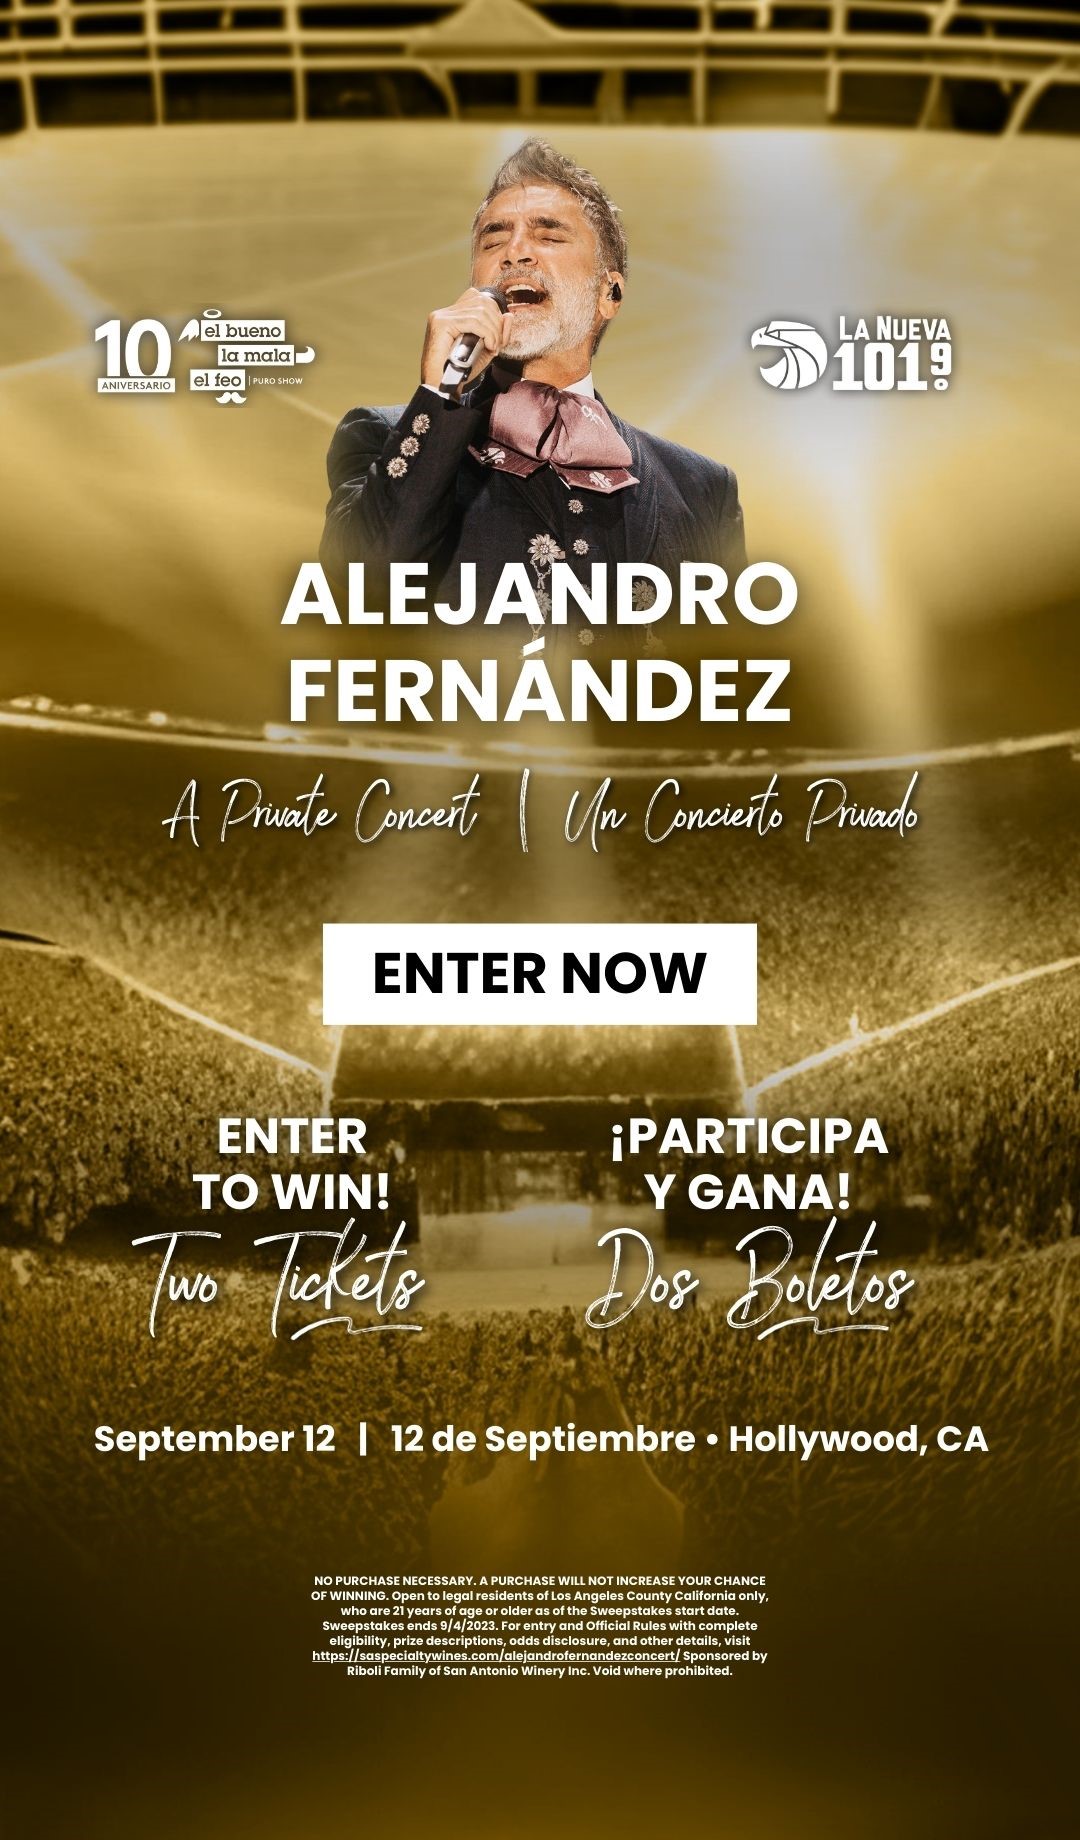 San Antonio Specialty is giving you the opportunity to win 2 tickets for Alejandro Fernández in a private concert in Hollywood, CA.